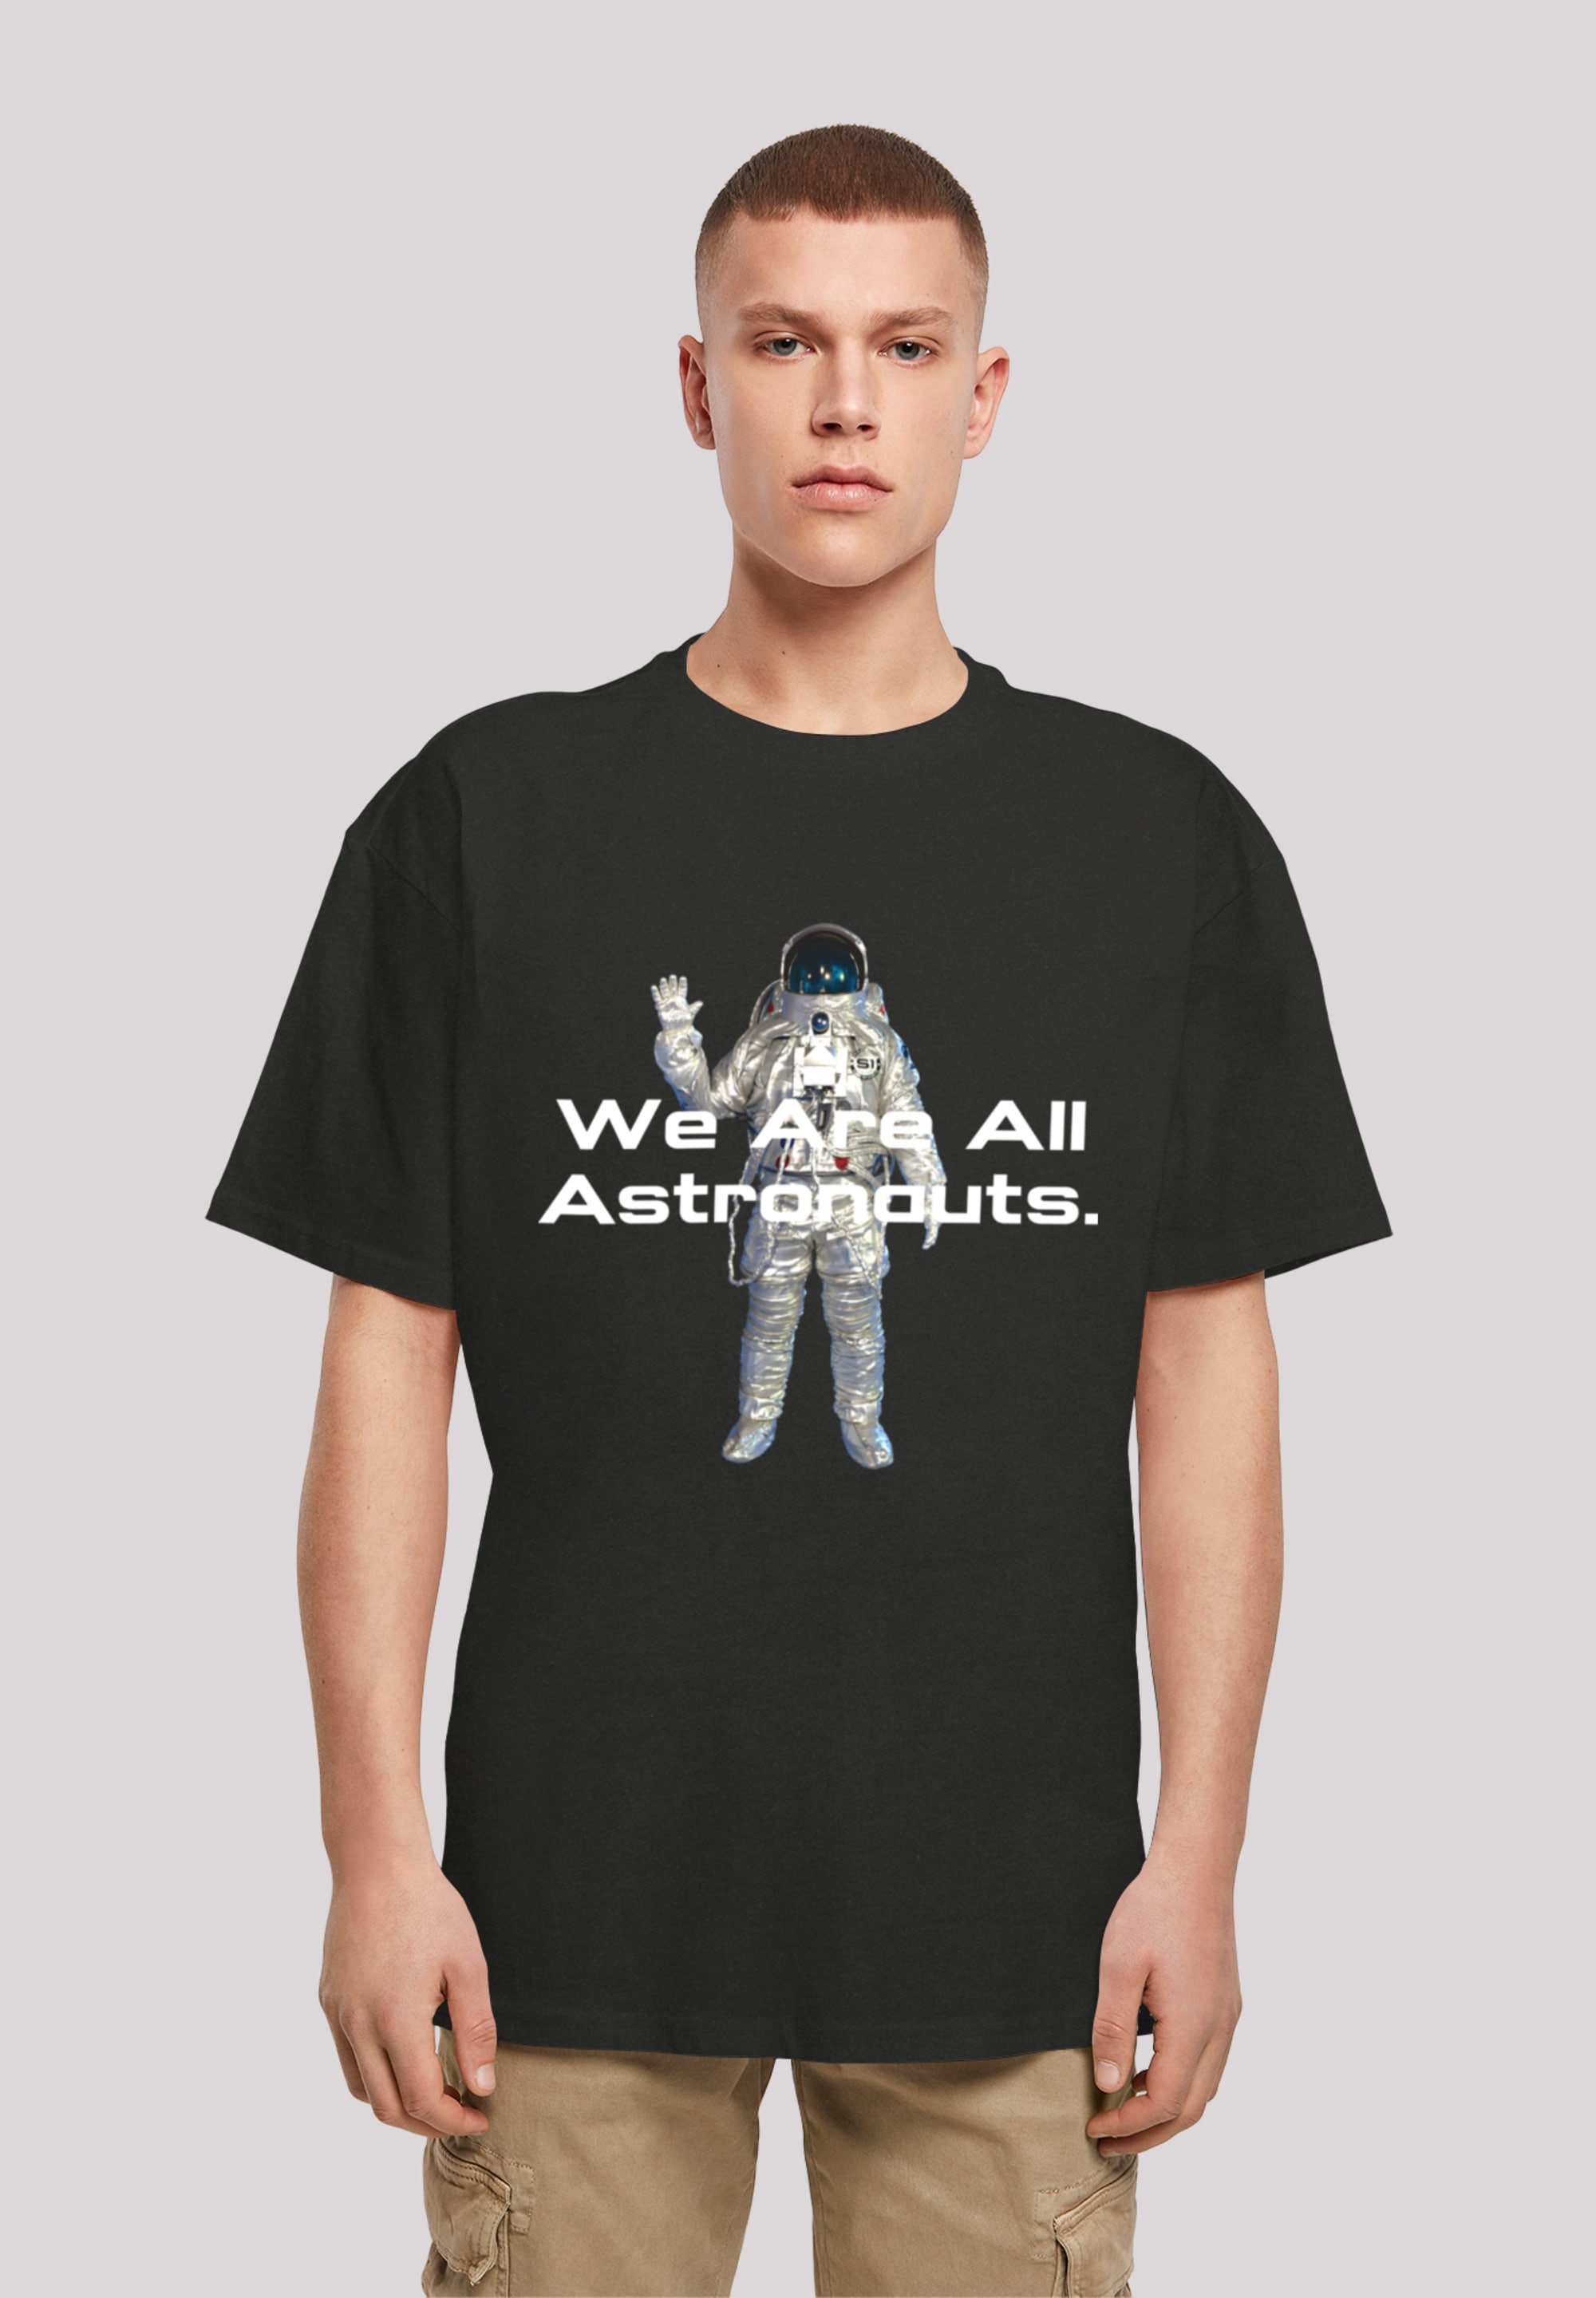 F4NT4STIC T-Shirt BAUR astronauts«, We all are Print kaufen »PHIBER SpaceOne ▷ 